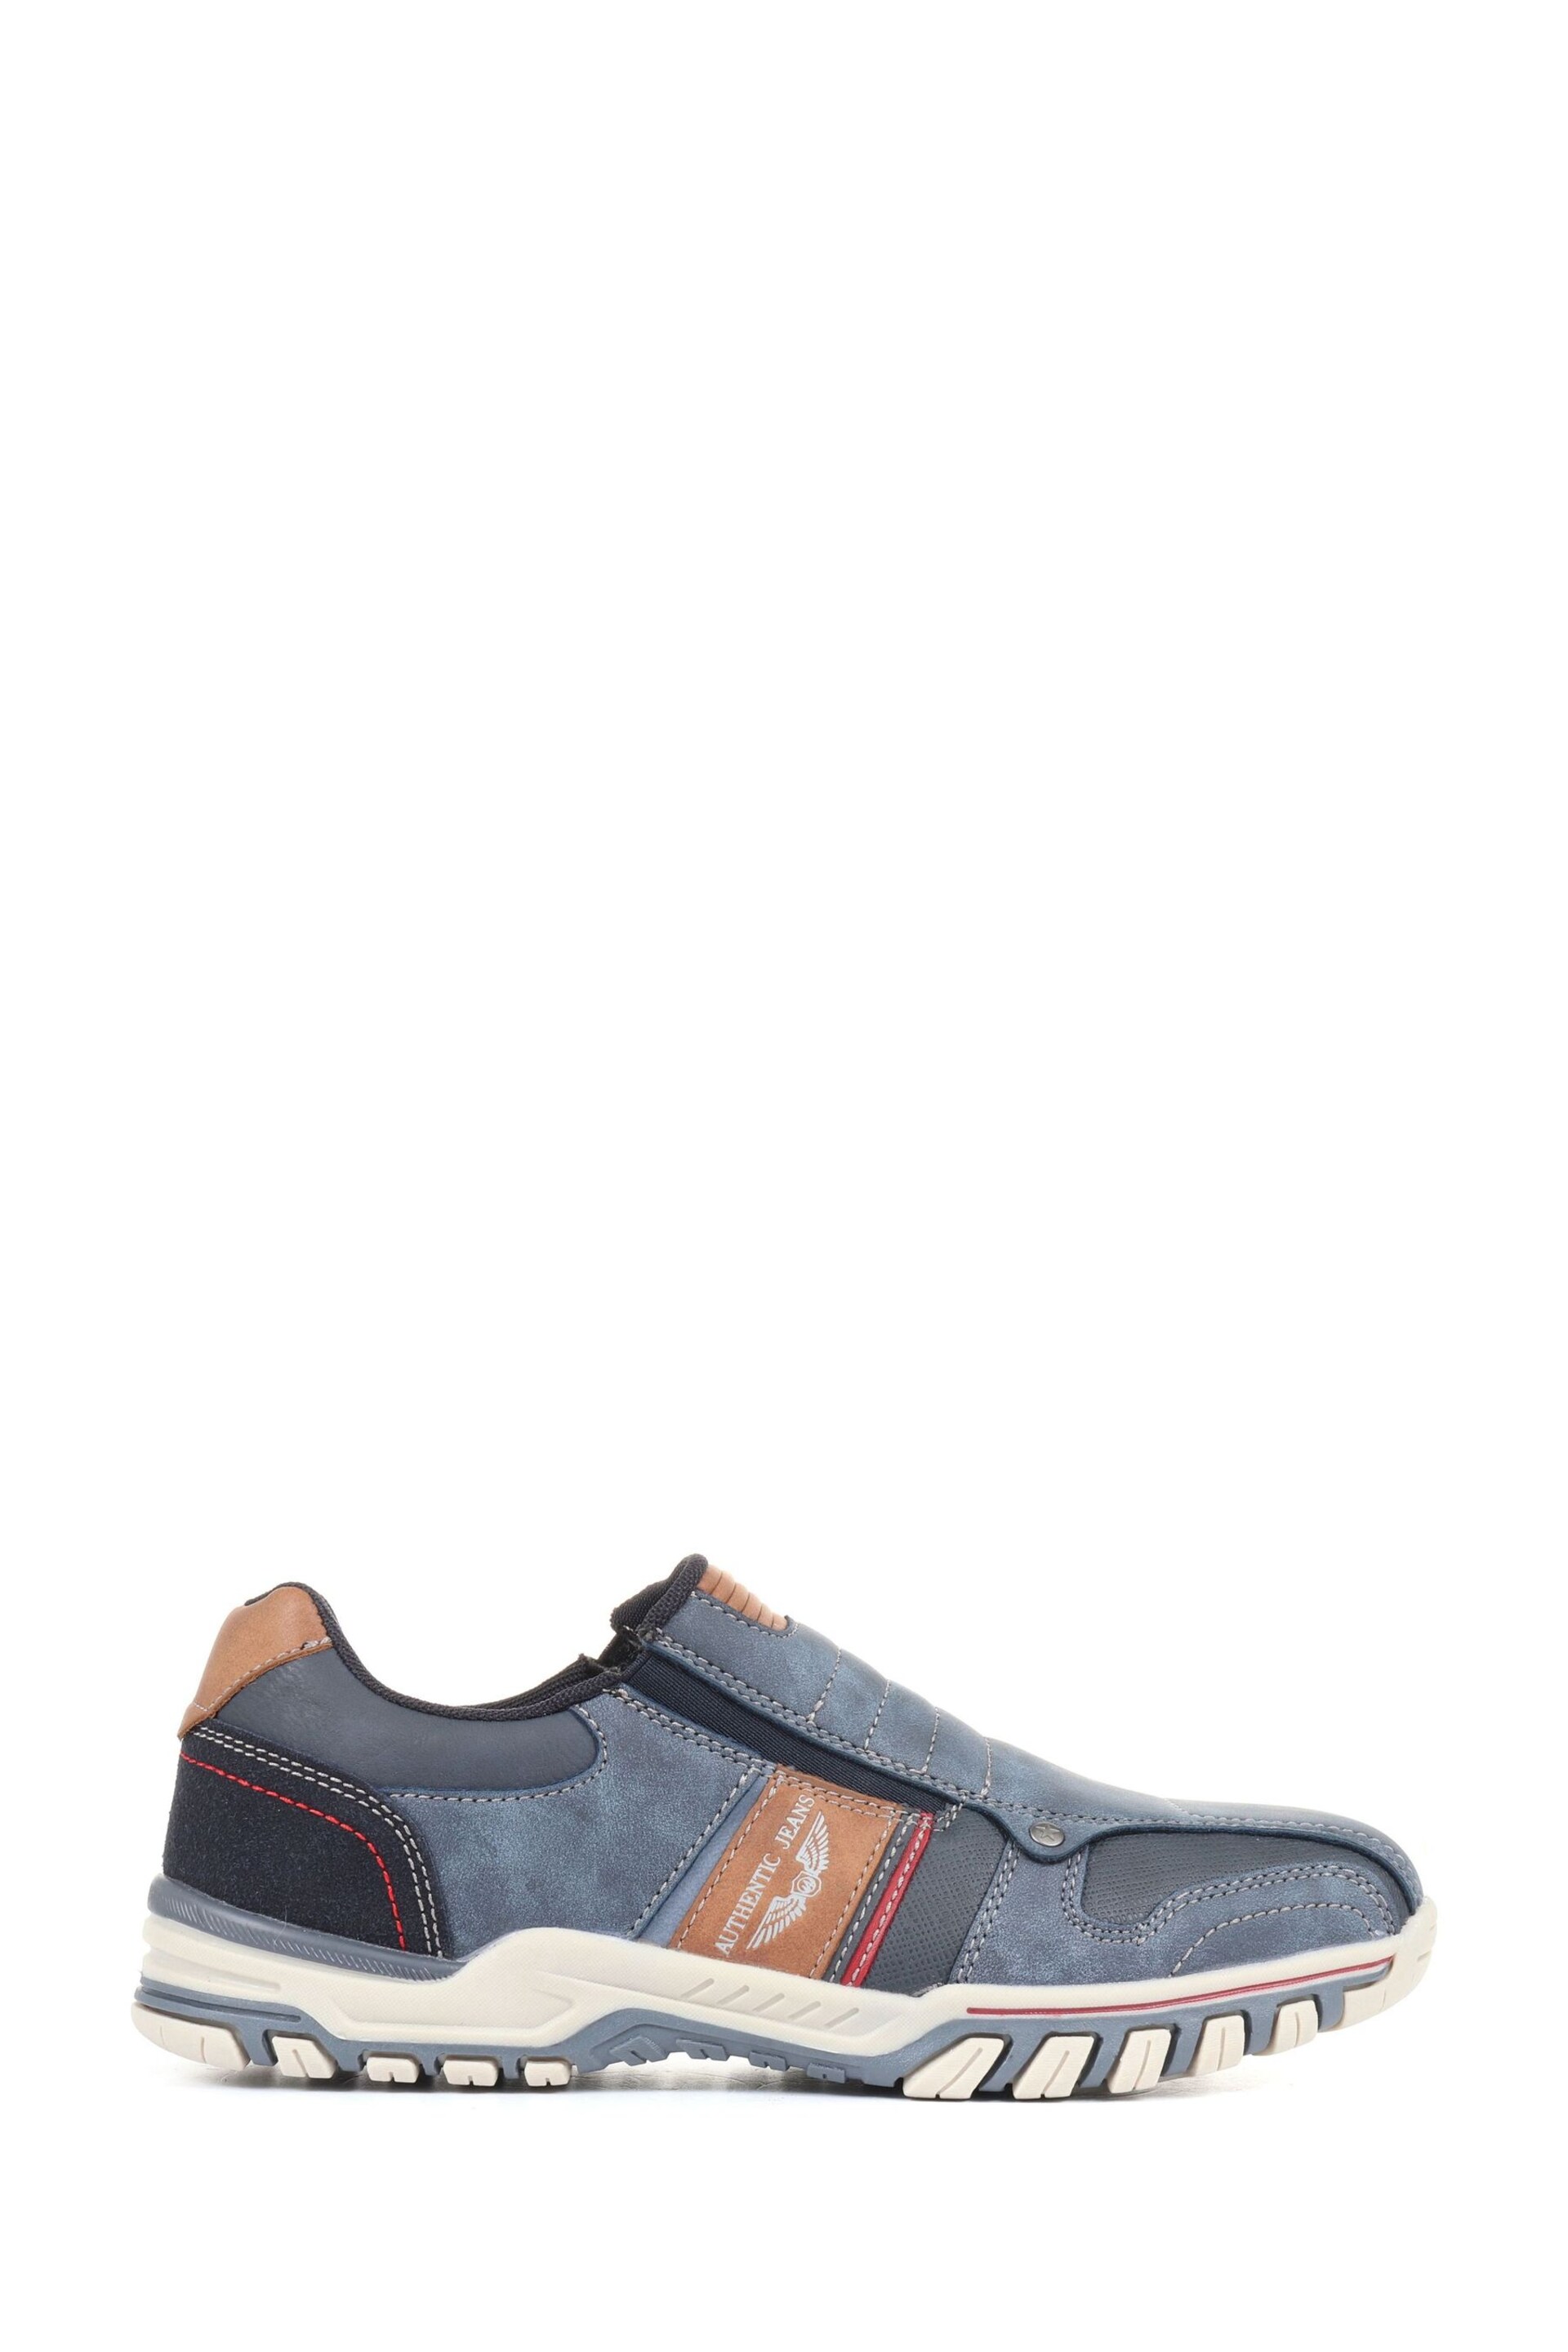 Pavers Wide Fit Mens Slip-On Trainers - Image 1 of 5